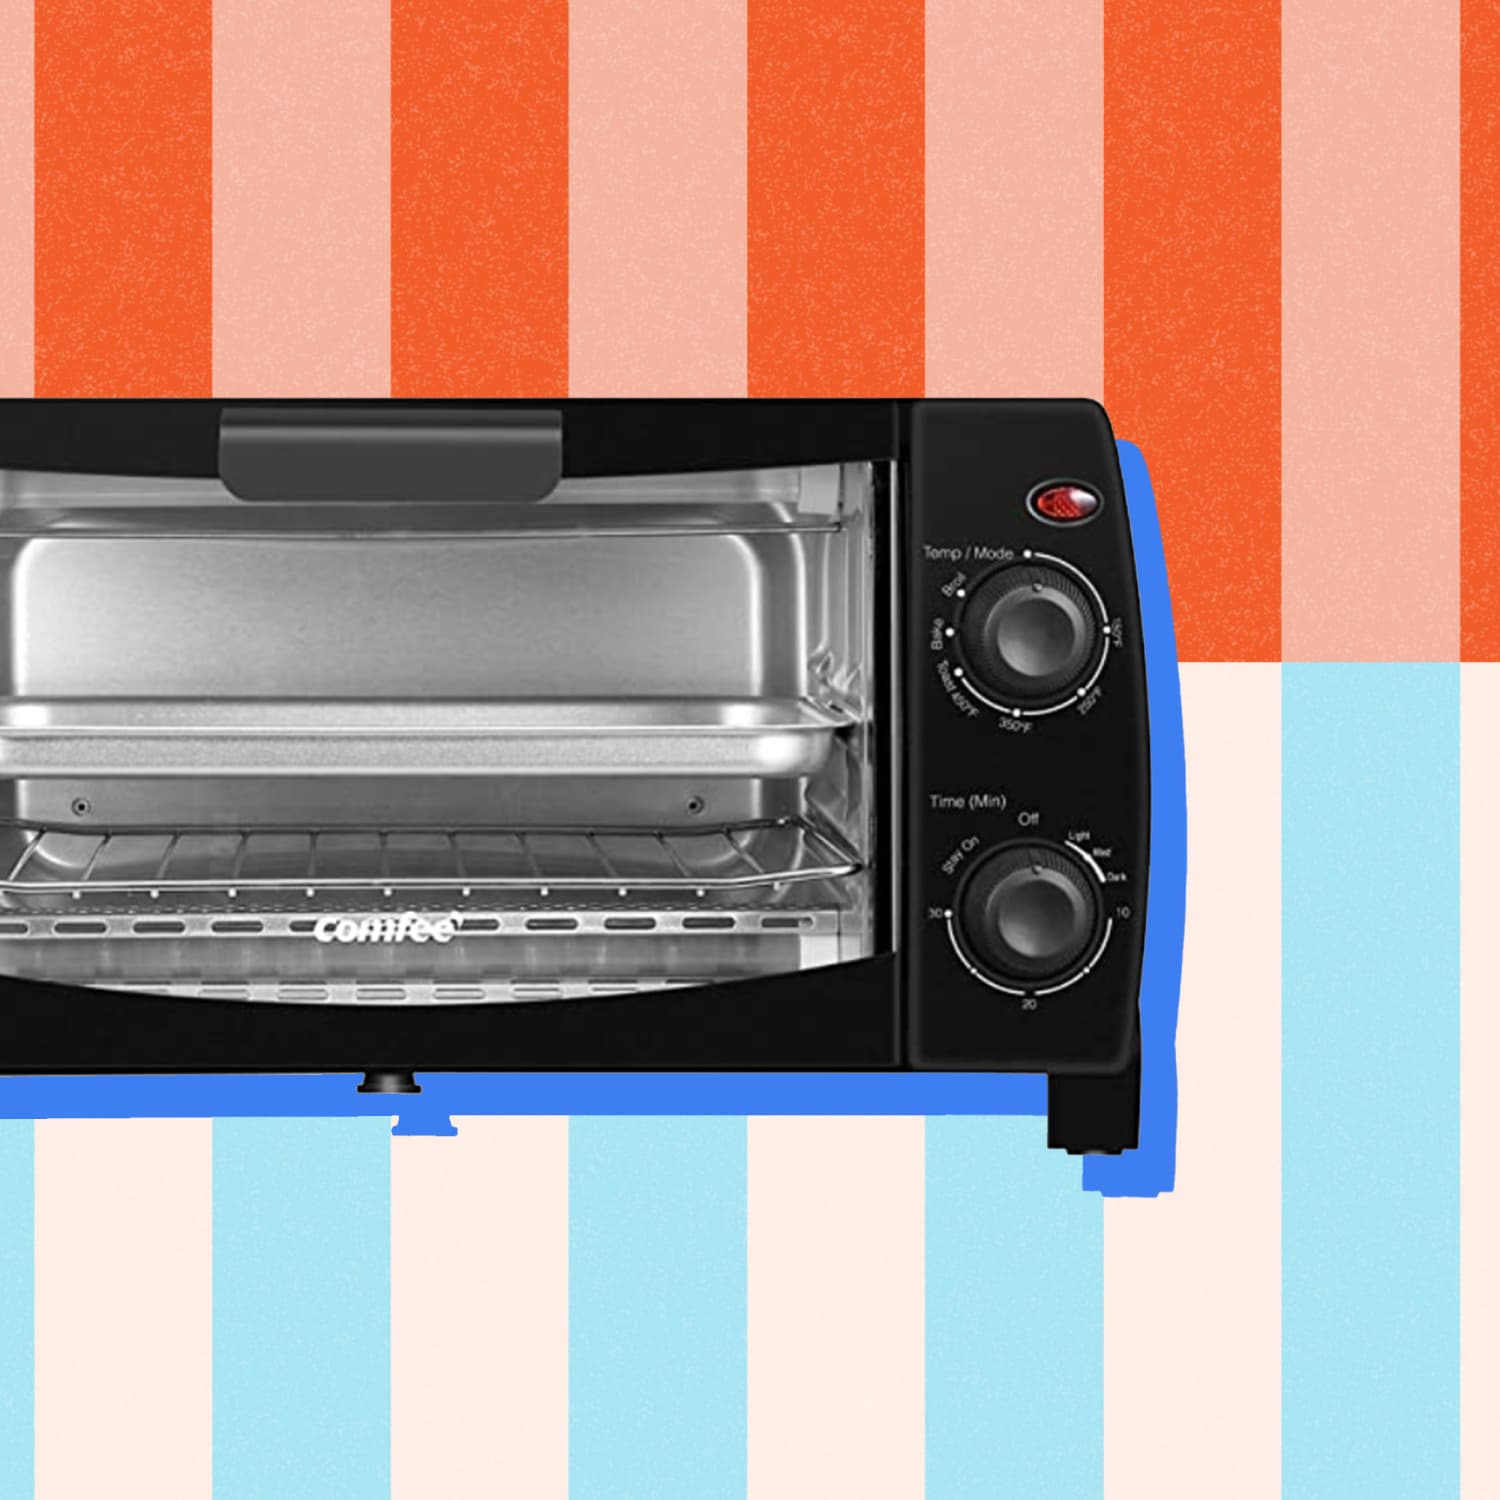 Most Popular Toaster Oven on